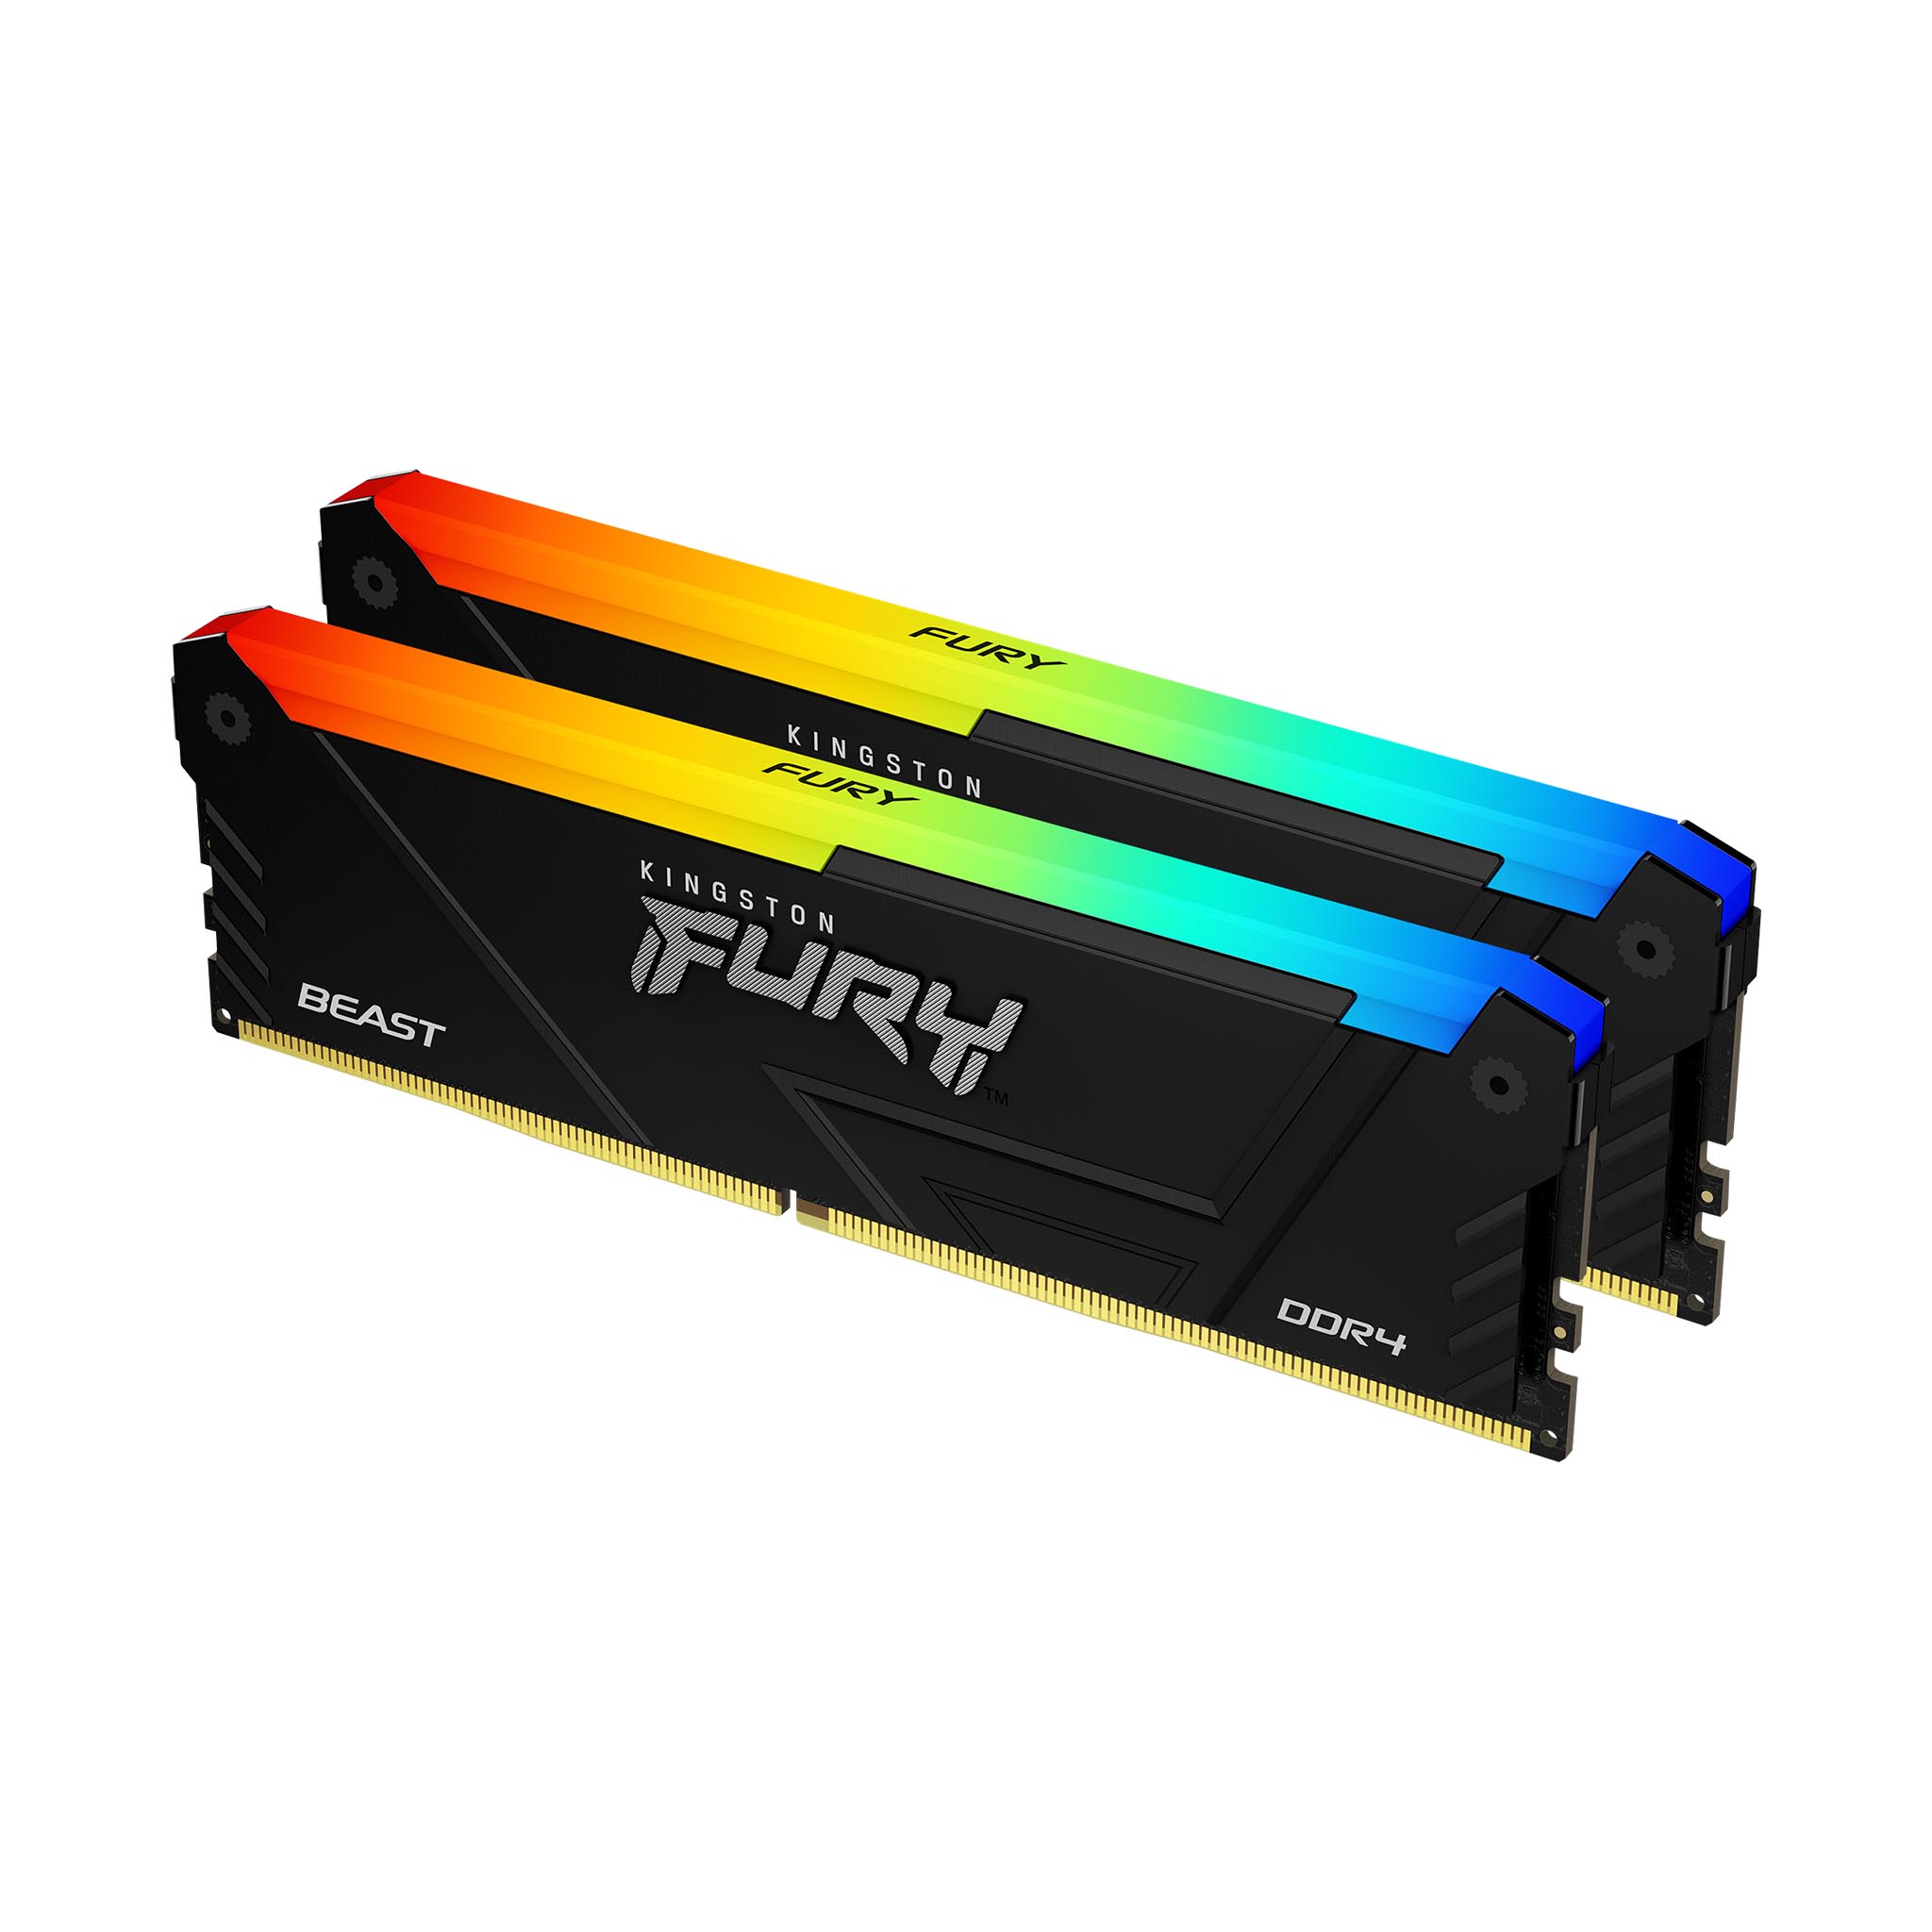  Buy Kingston Fury Beast DDR4 RGB Special Edition Memory 8GB  3200MT/s DDR4 CL16 DIMM White RGB SE Online at Low Prices in India